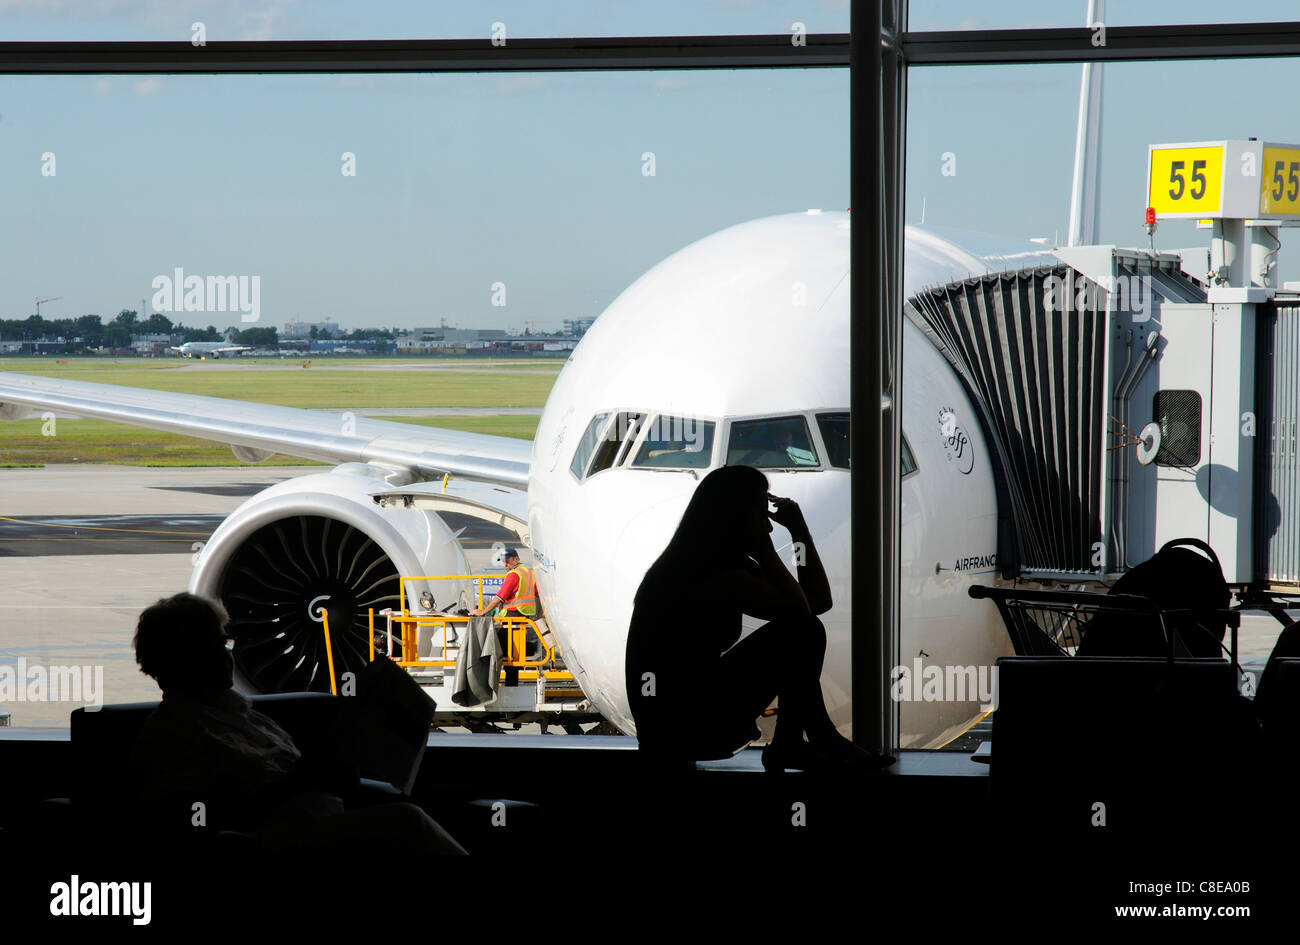 A young woman on a mobile phone in silhouette in an airport departure lounge window with a plane behind Stock Photo